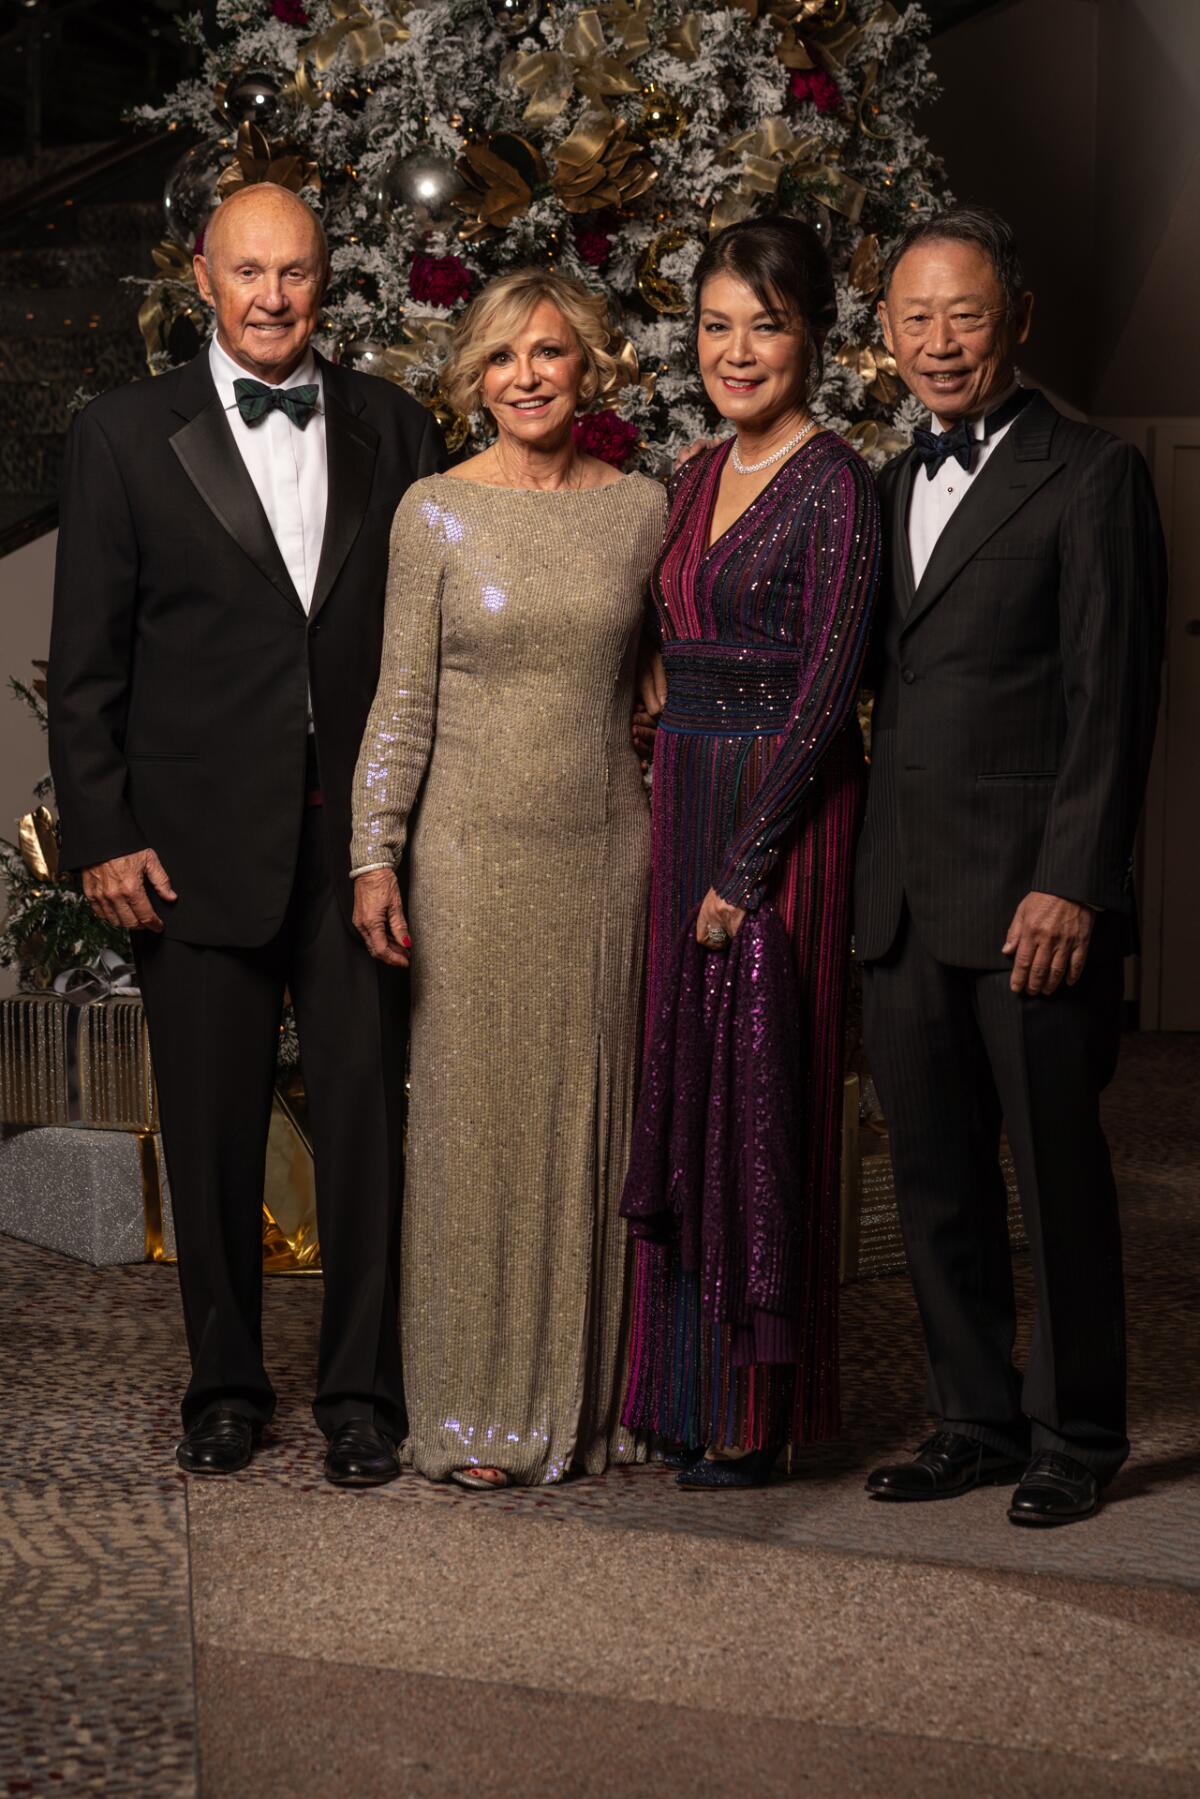 Chairman Larry Higby and Dee Higby join major donors Betty Huang and S.L. Huang at the Candlelight Concert.